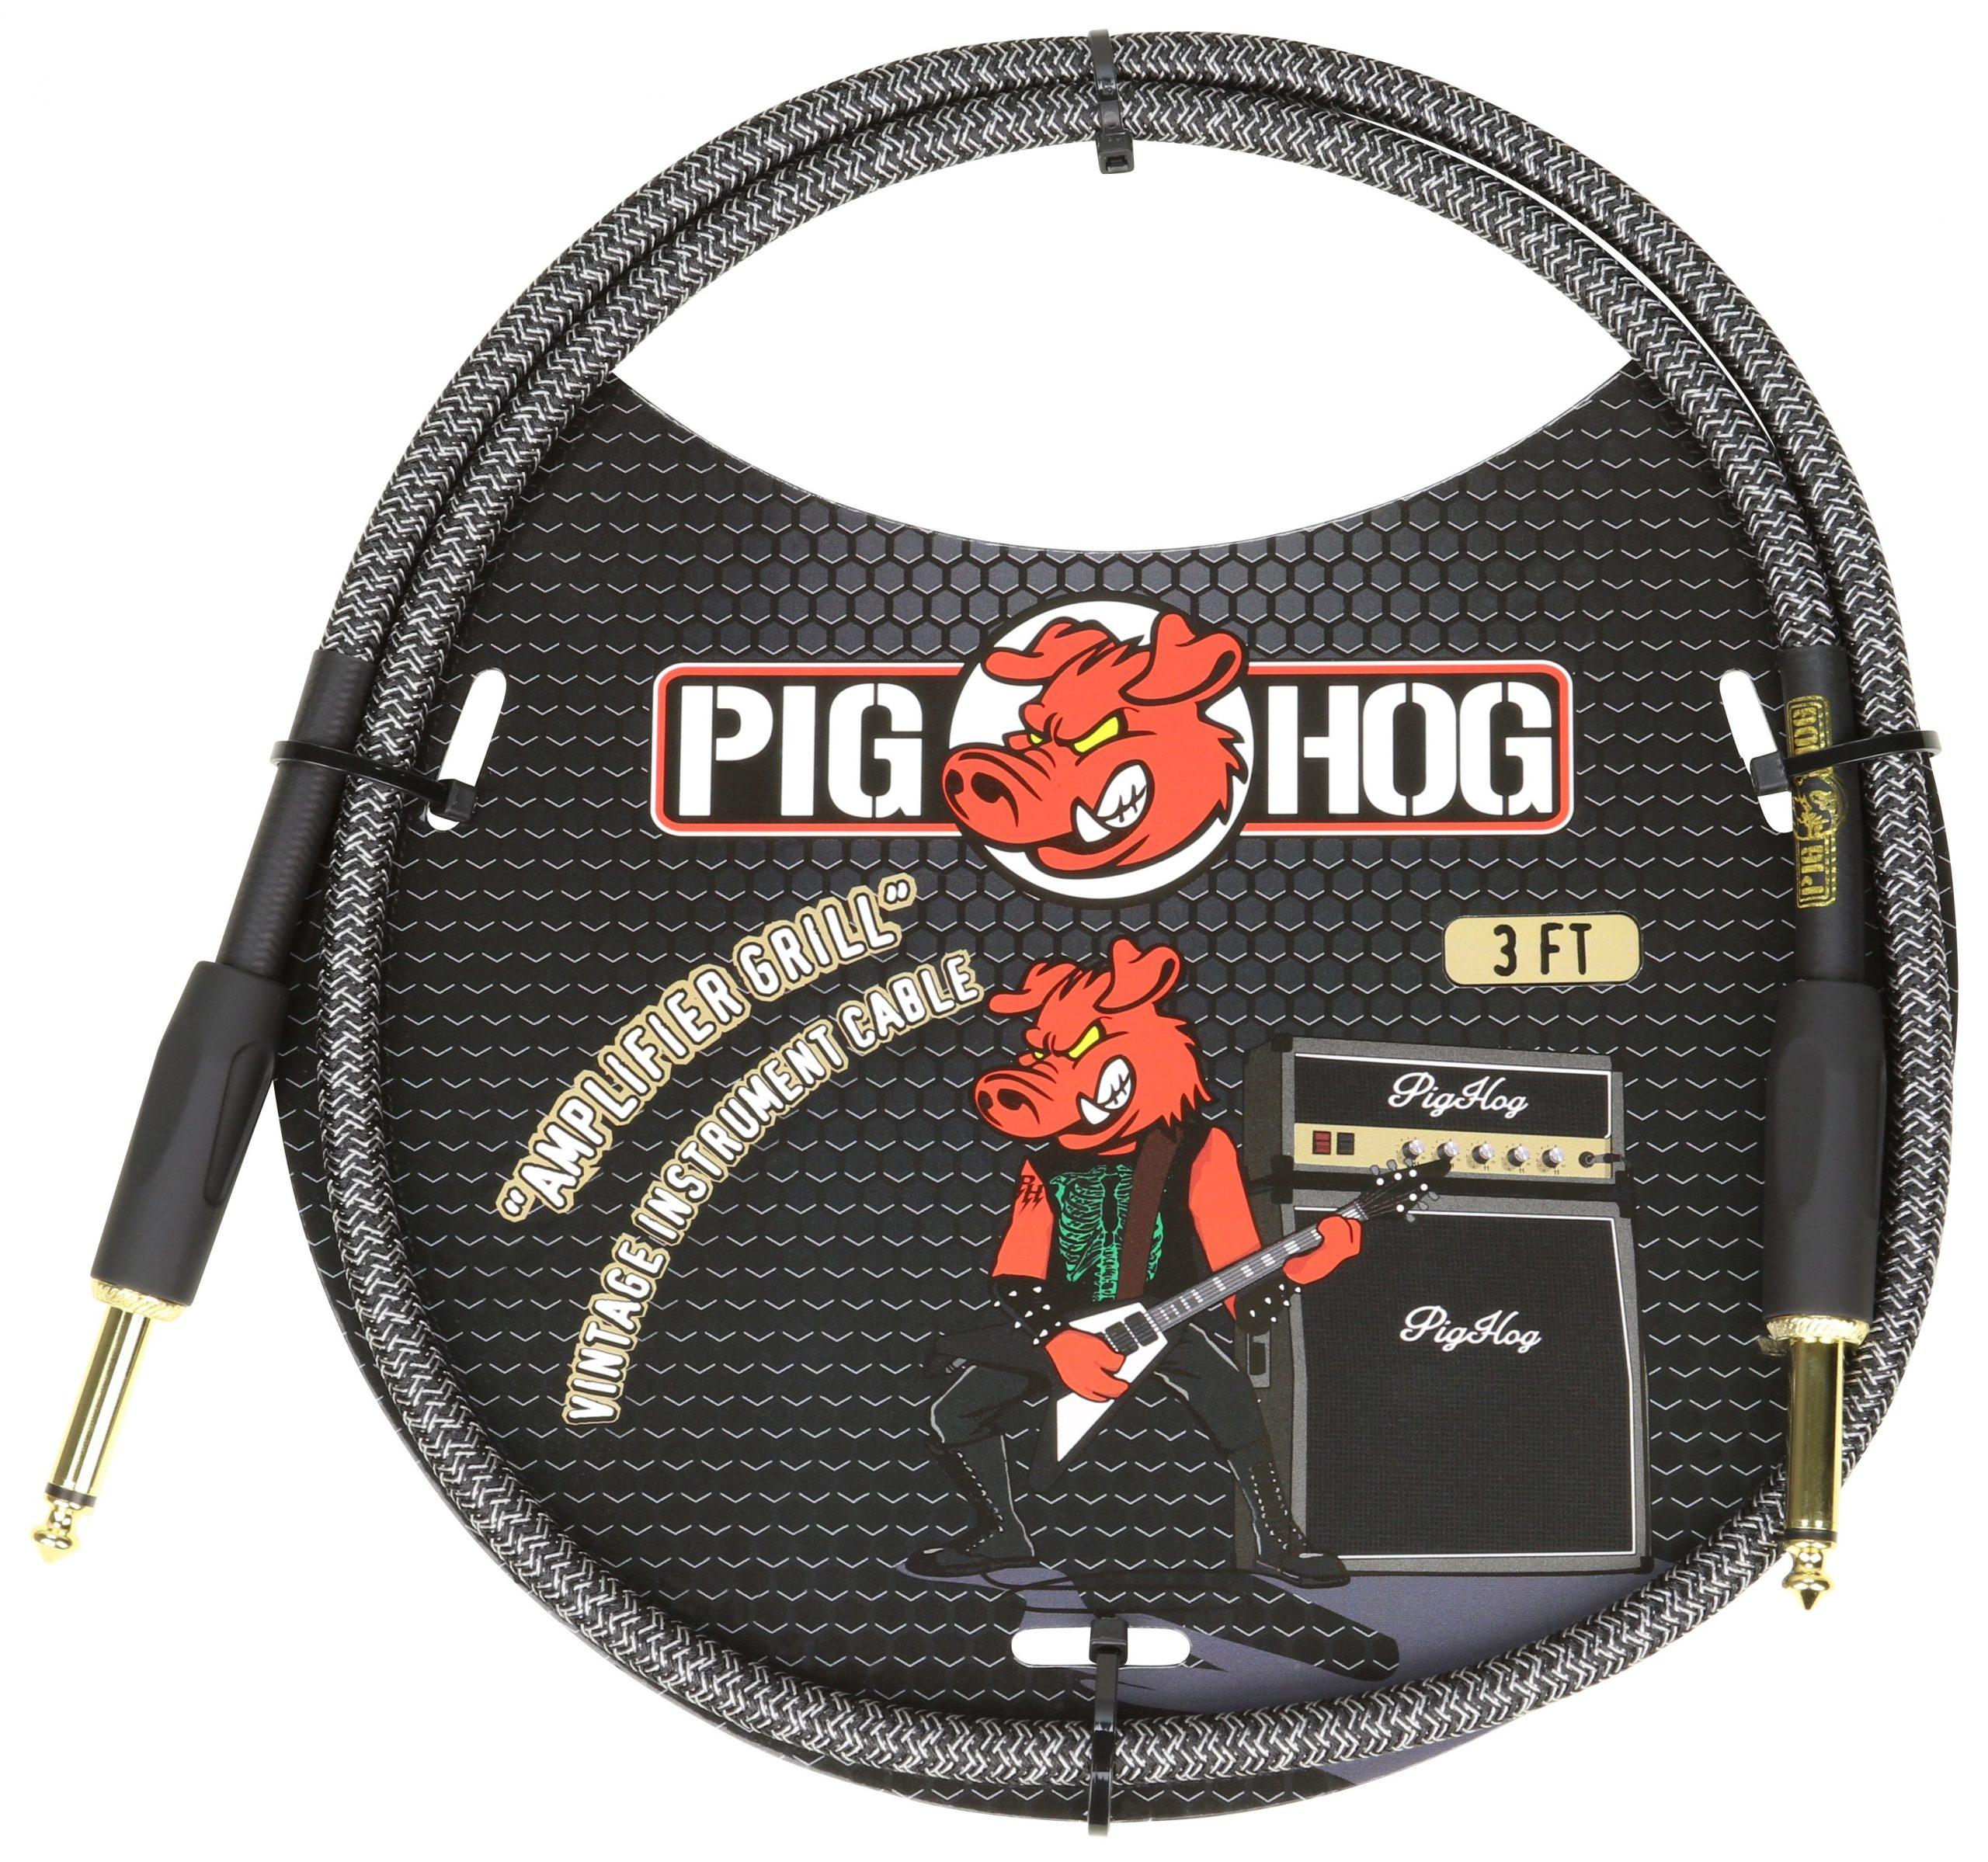 Pig Hog "Amplifier Grill" 3ft Patch Cables